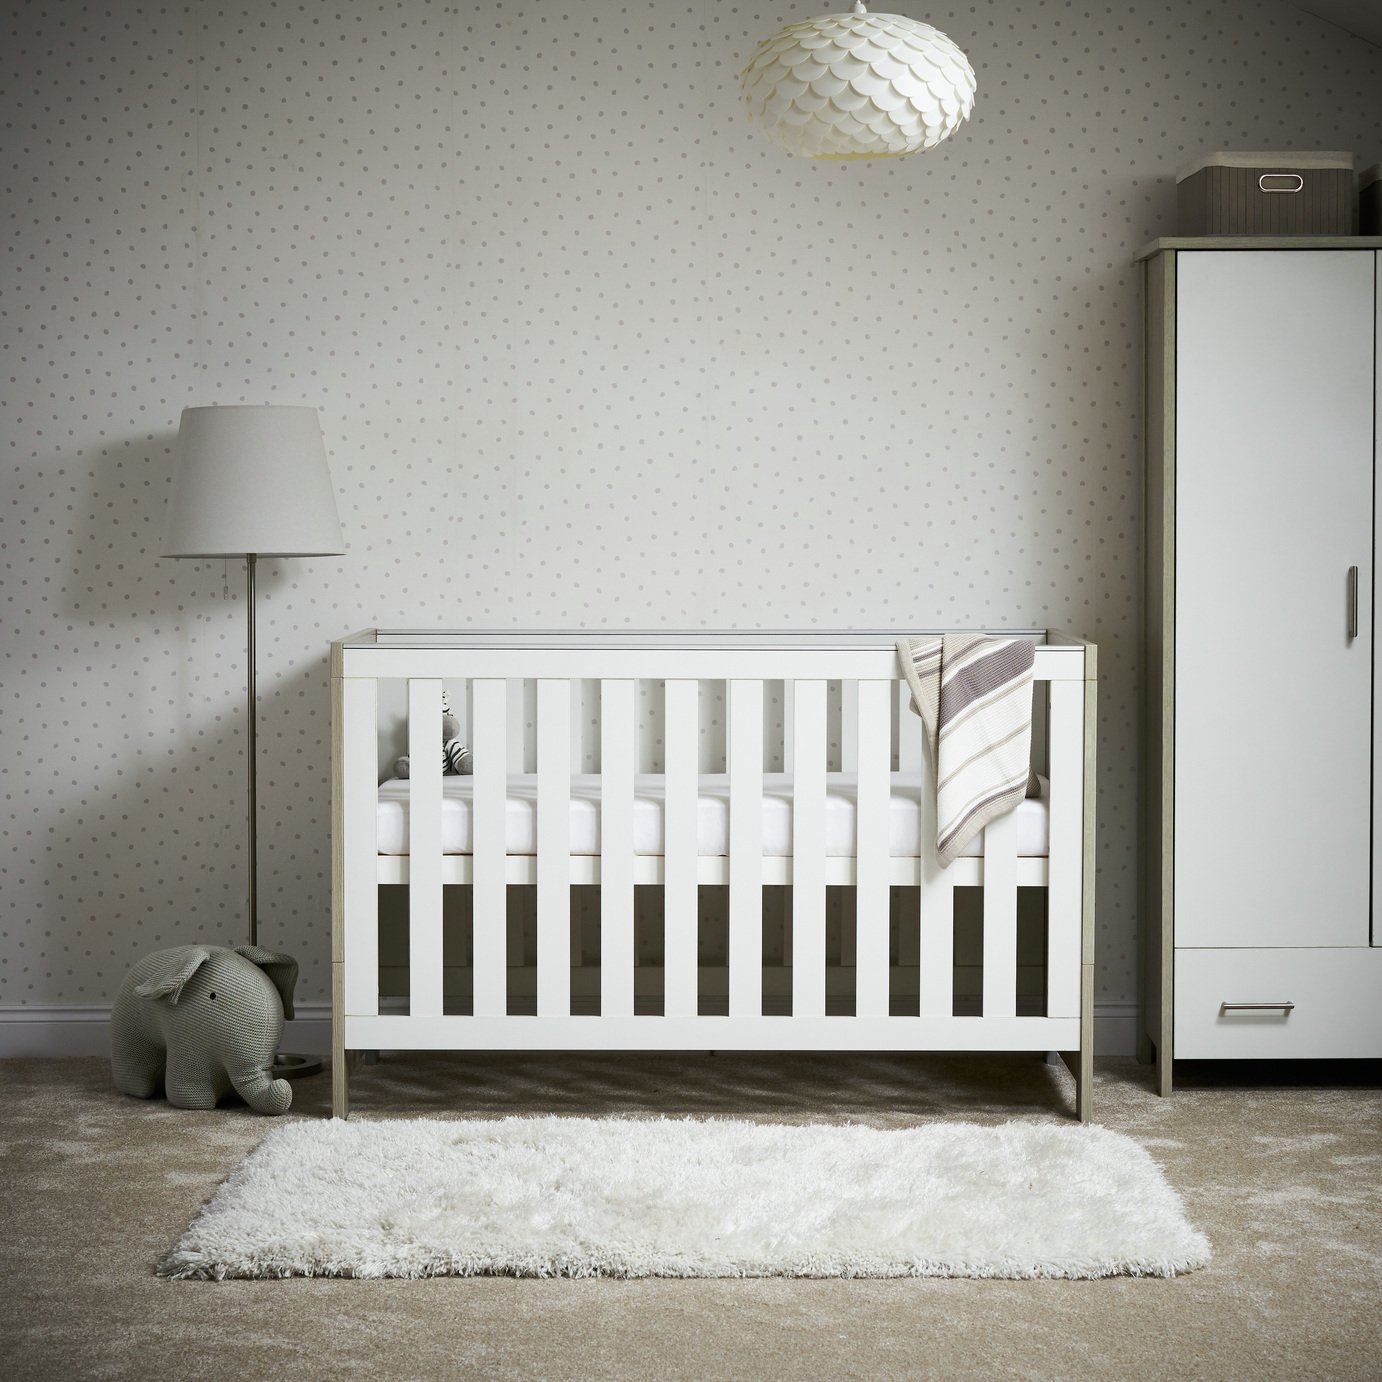 Obaby Nika Cot Bed Review